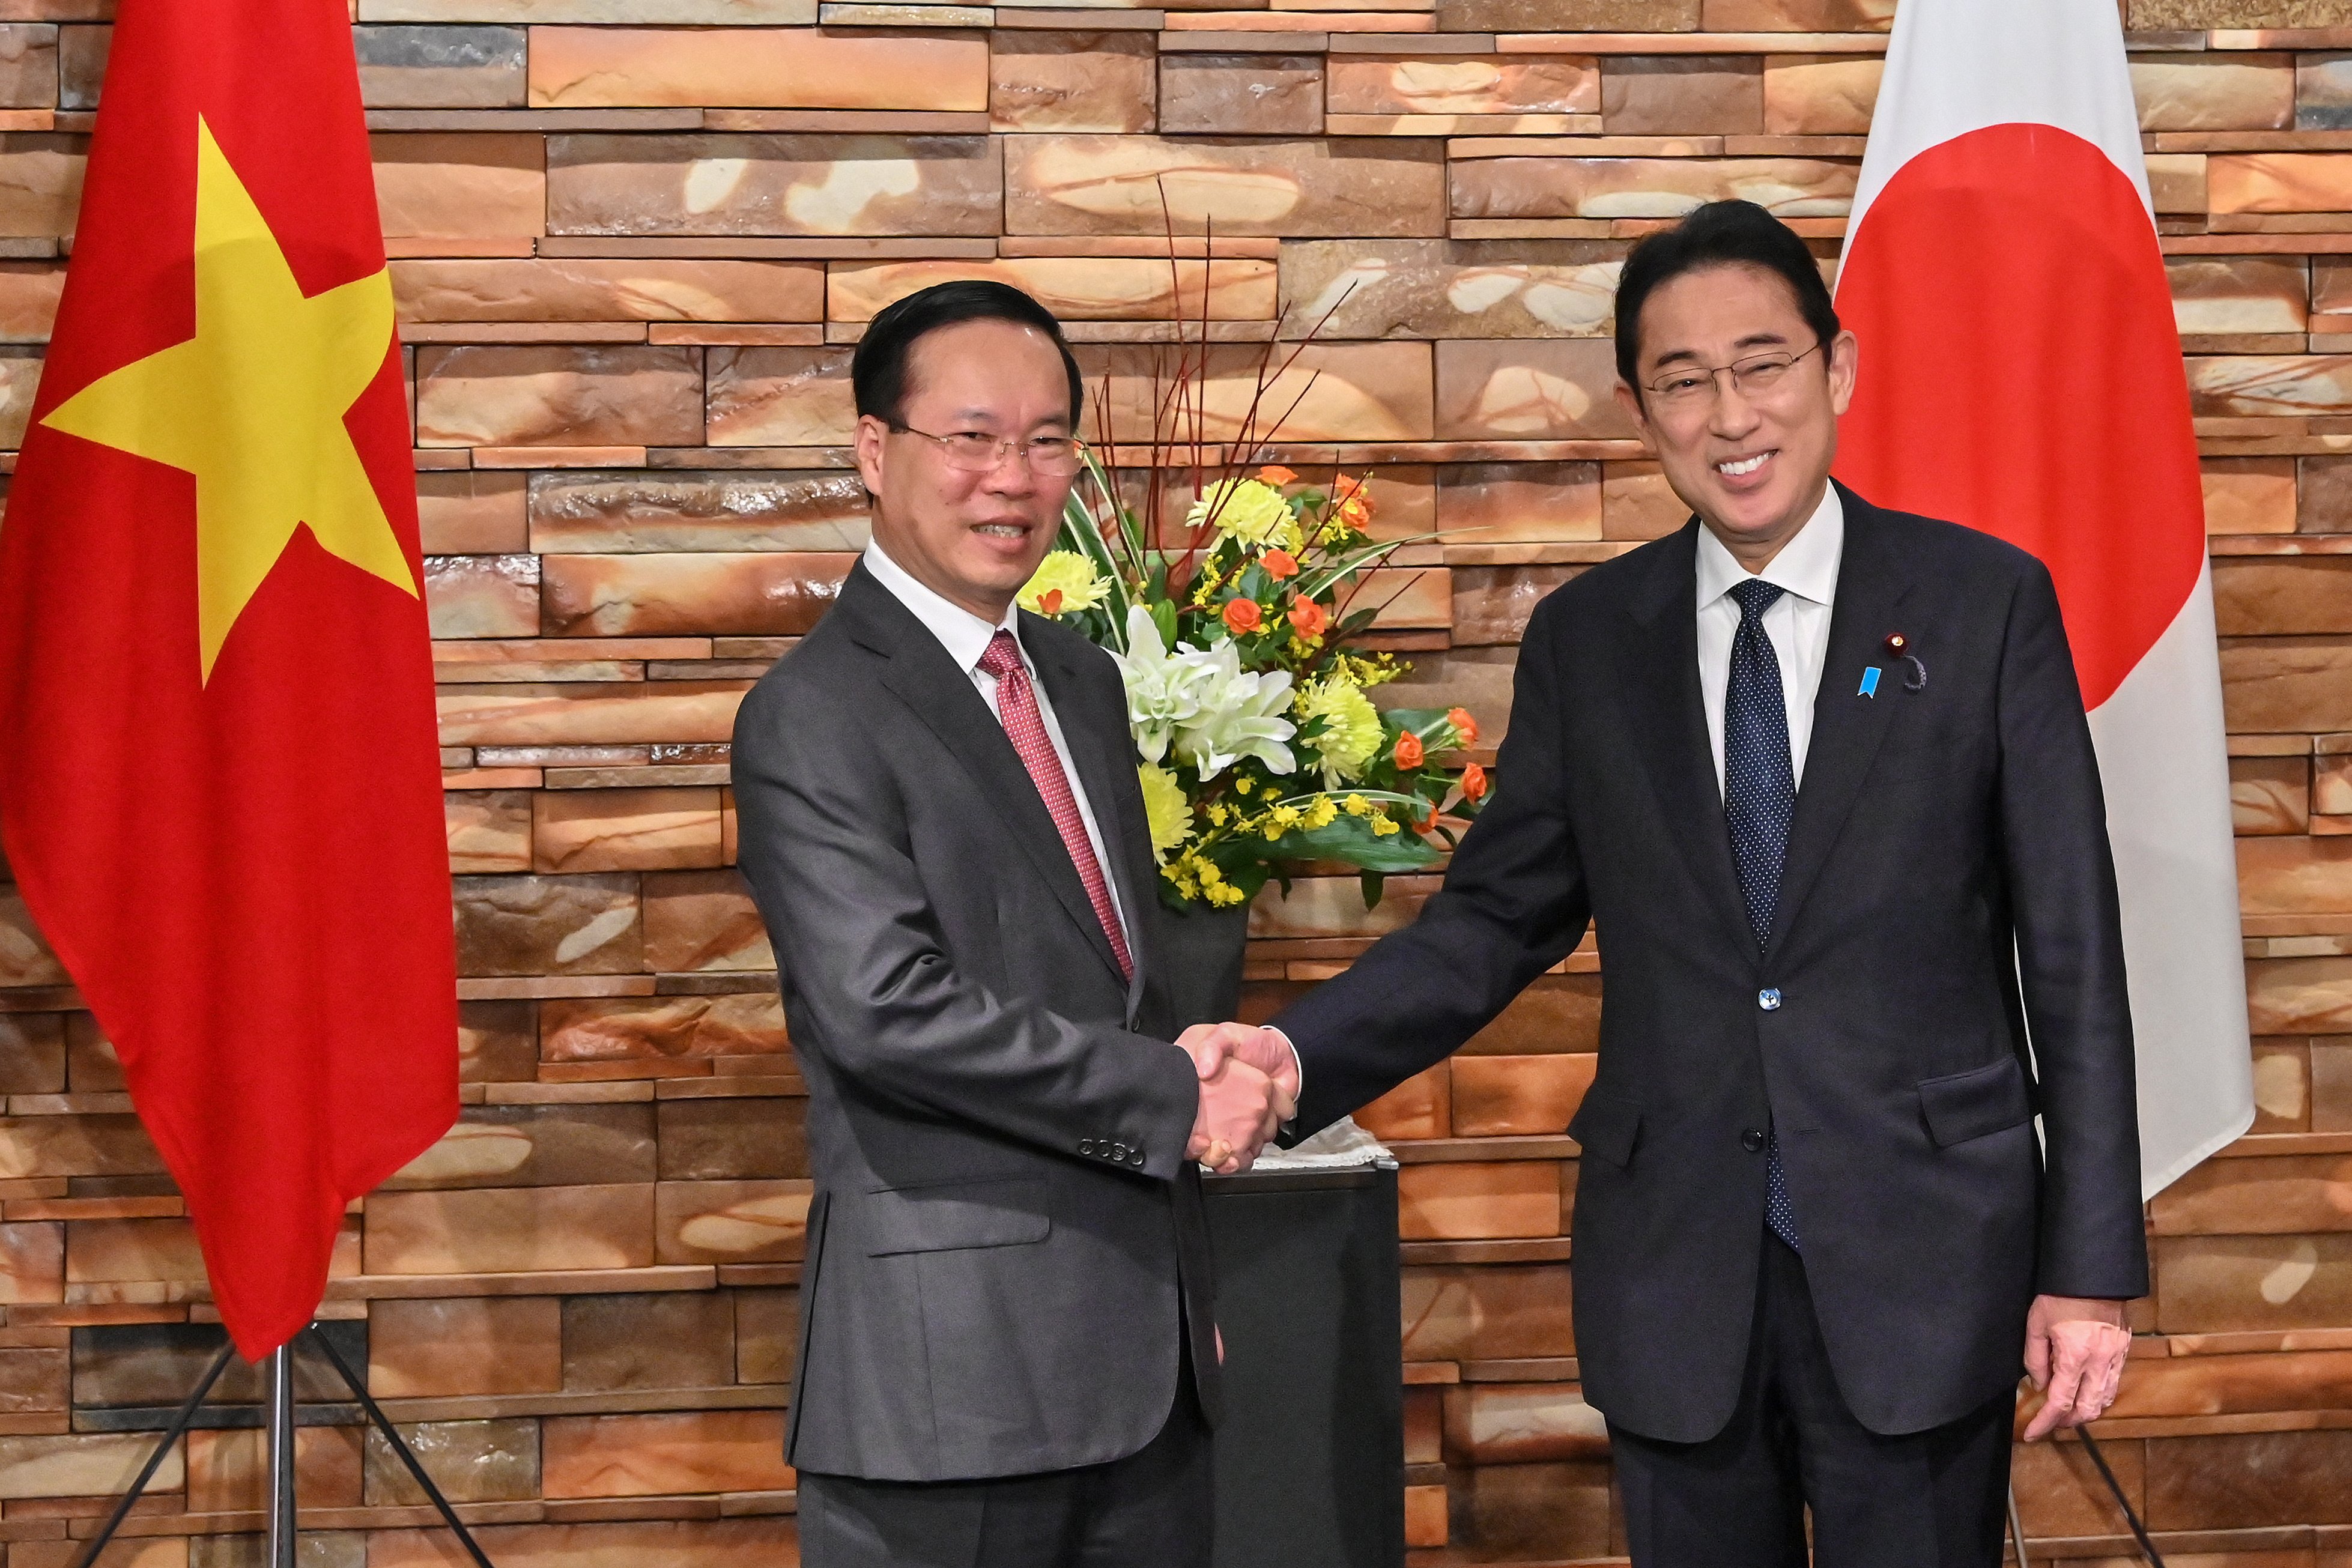 Vietnamese President Vo Van Thuong (left) shakes hands with Fumio Kishida during a visit to the Japanese prime minister’s official residence in Tokyo on Monday. Photo: EPA-EFE